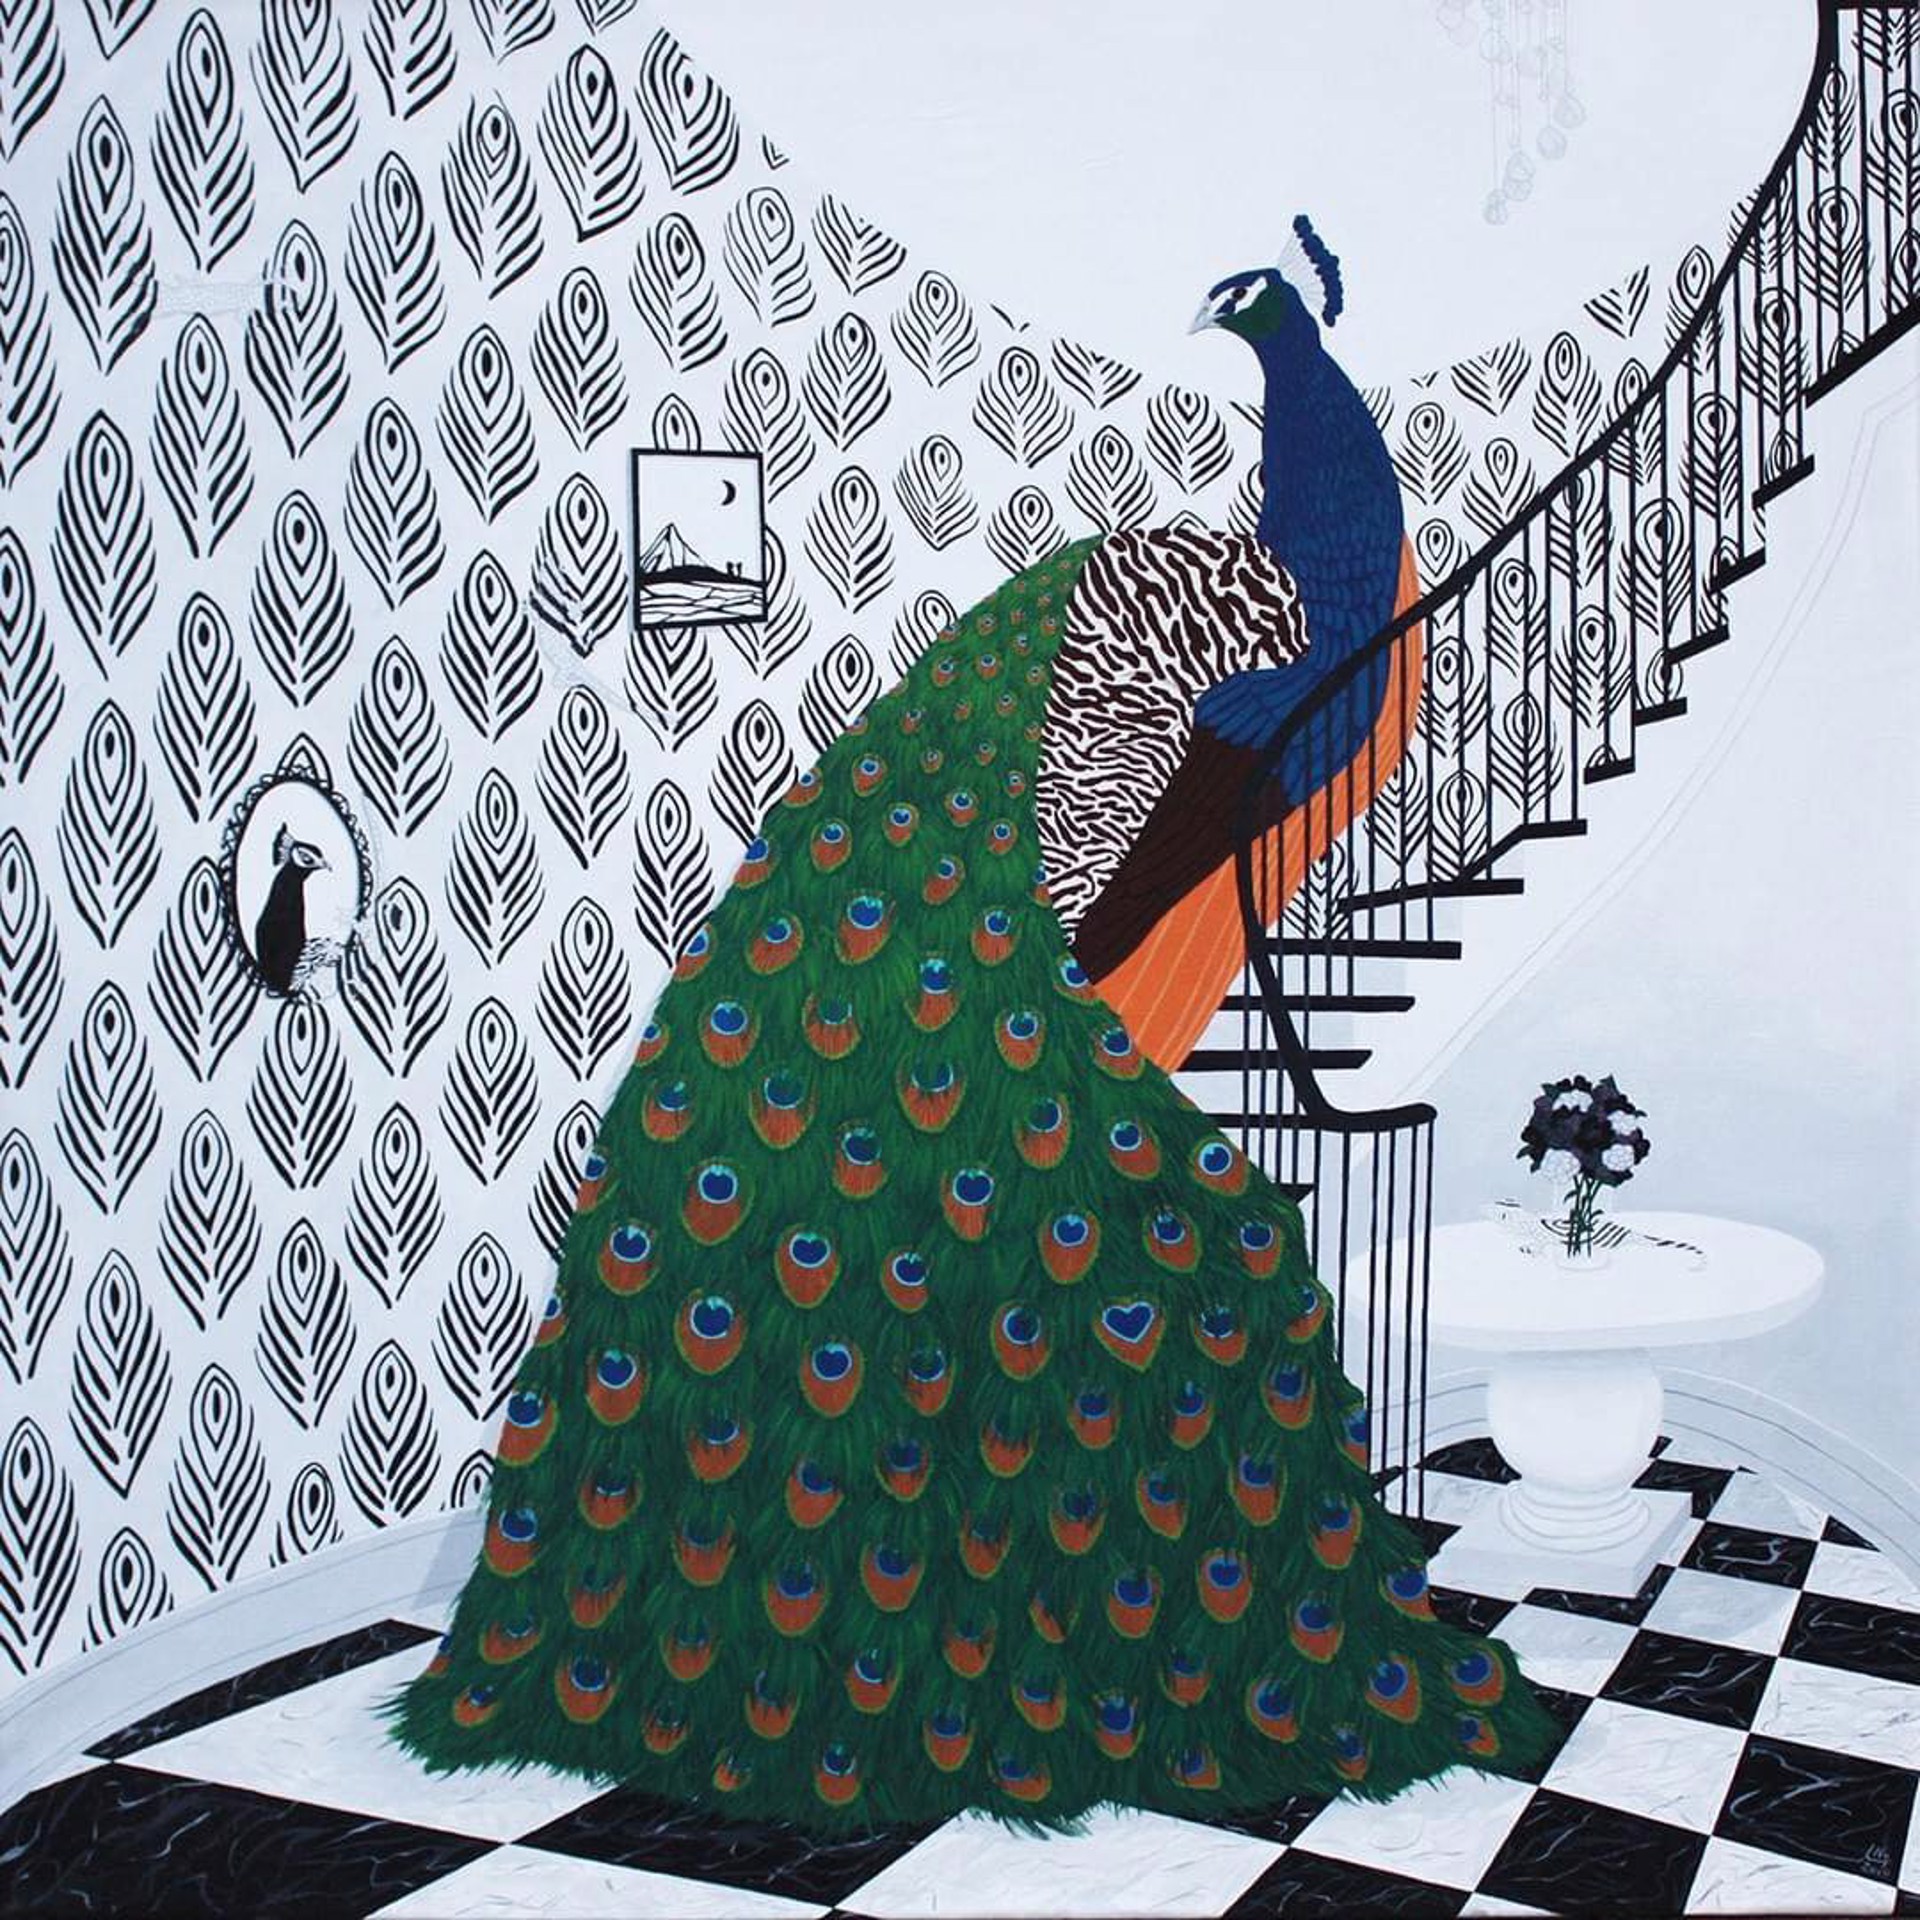 Peacock Descending A Staircase by Lisa Ng